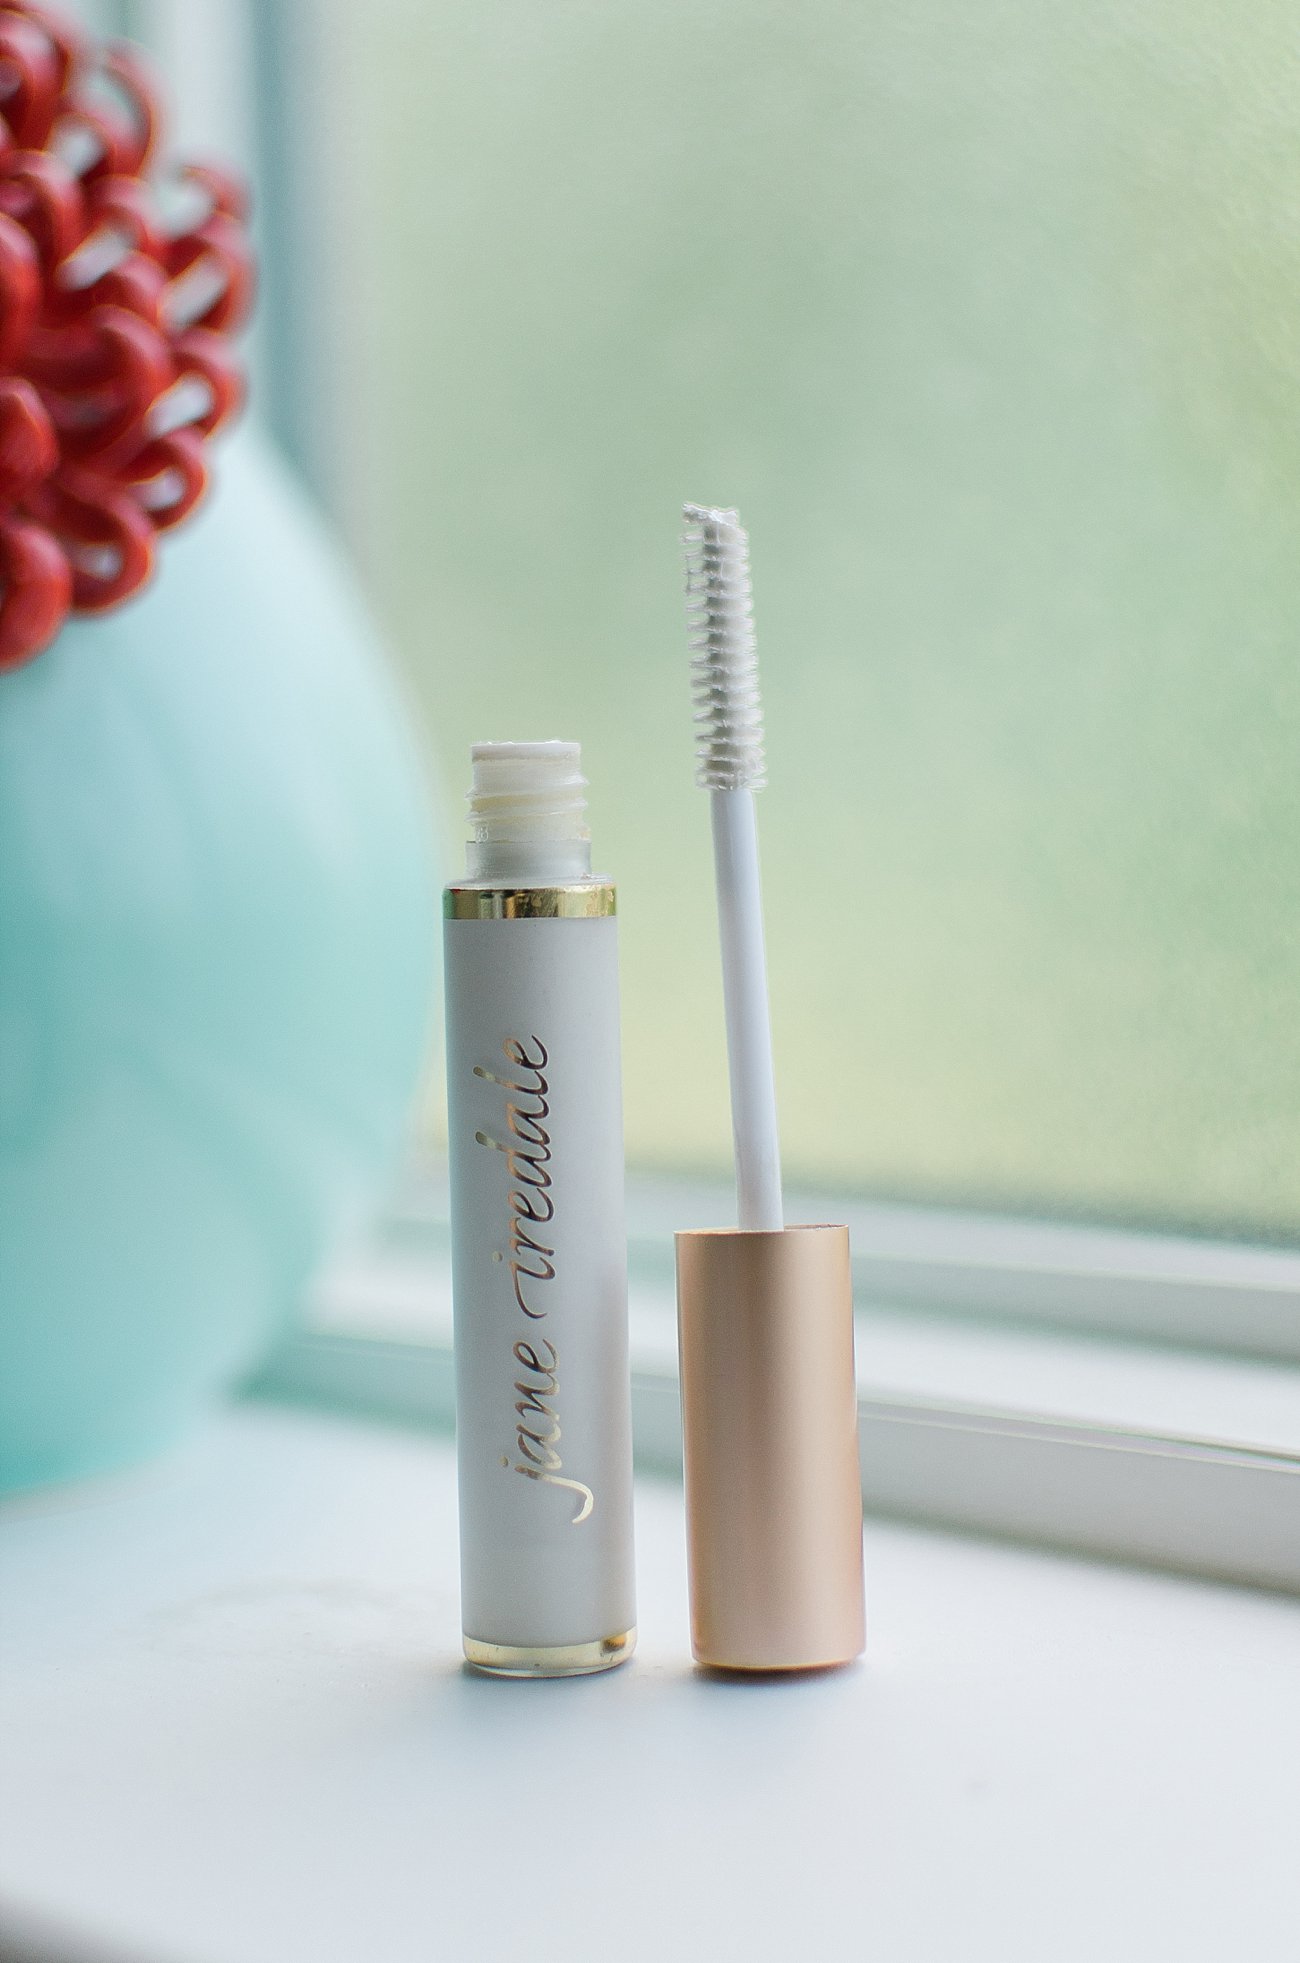 The Best Natural, Clean, Non-Toxic and Organic Mascaras Put to the Test by NC blogger Still Being Molly